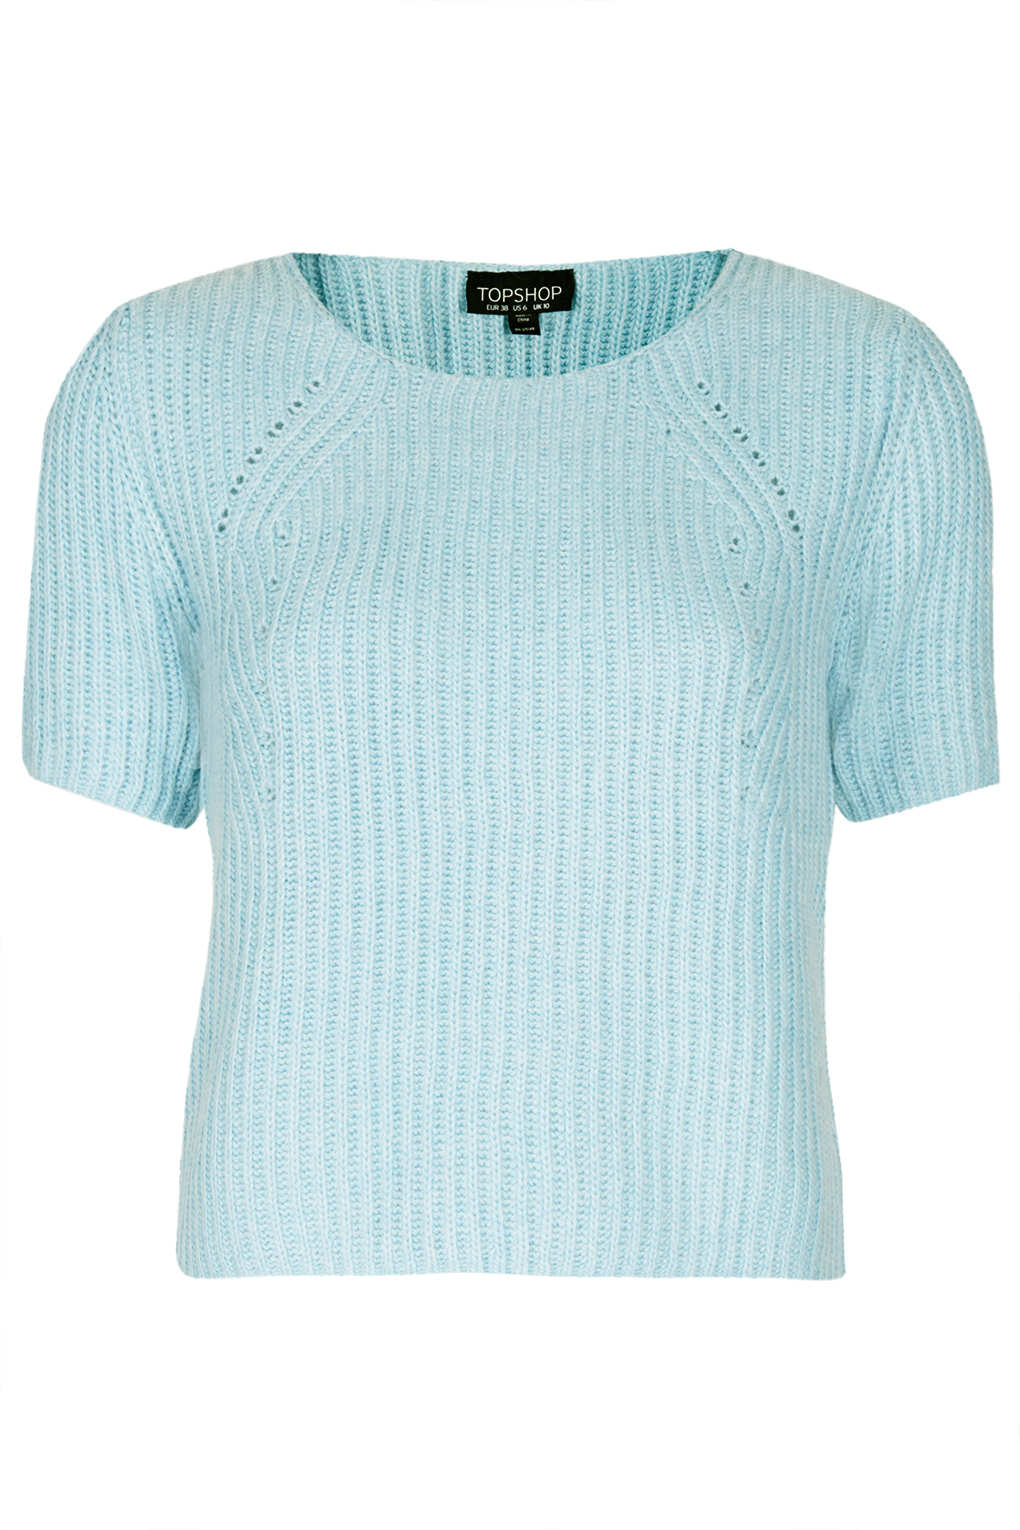 Topshop Knitted Short Sleeve Rib Top in Blue | Lyst